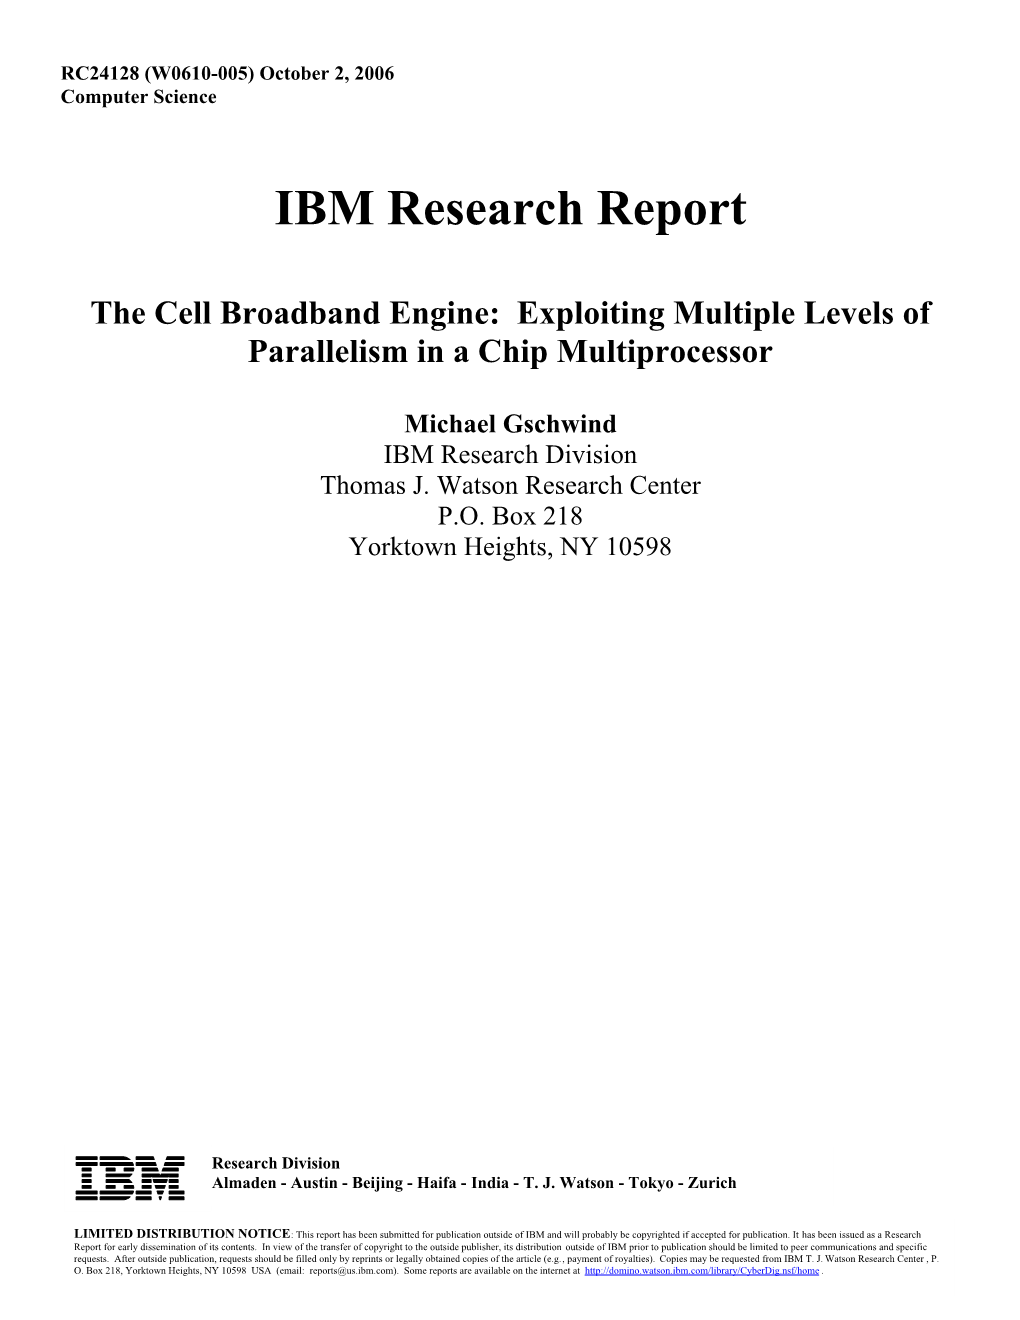 The Cell Broadband Engine: Exploiting Multiple Levels of Parallelism in a Chip Multiprocessor